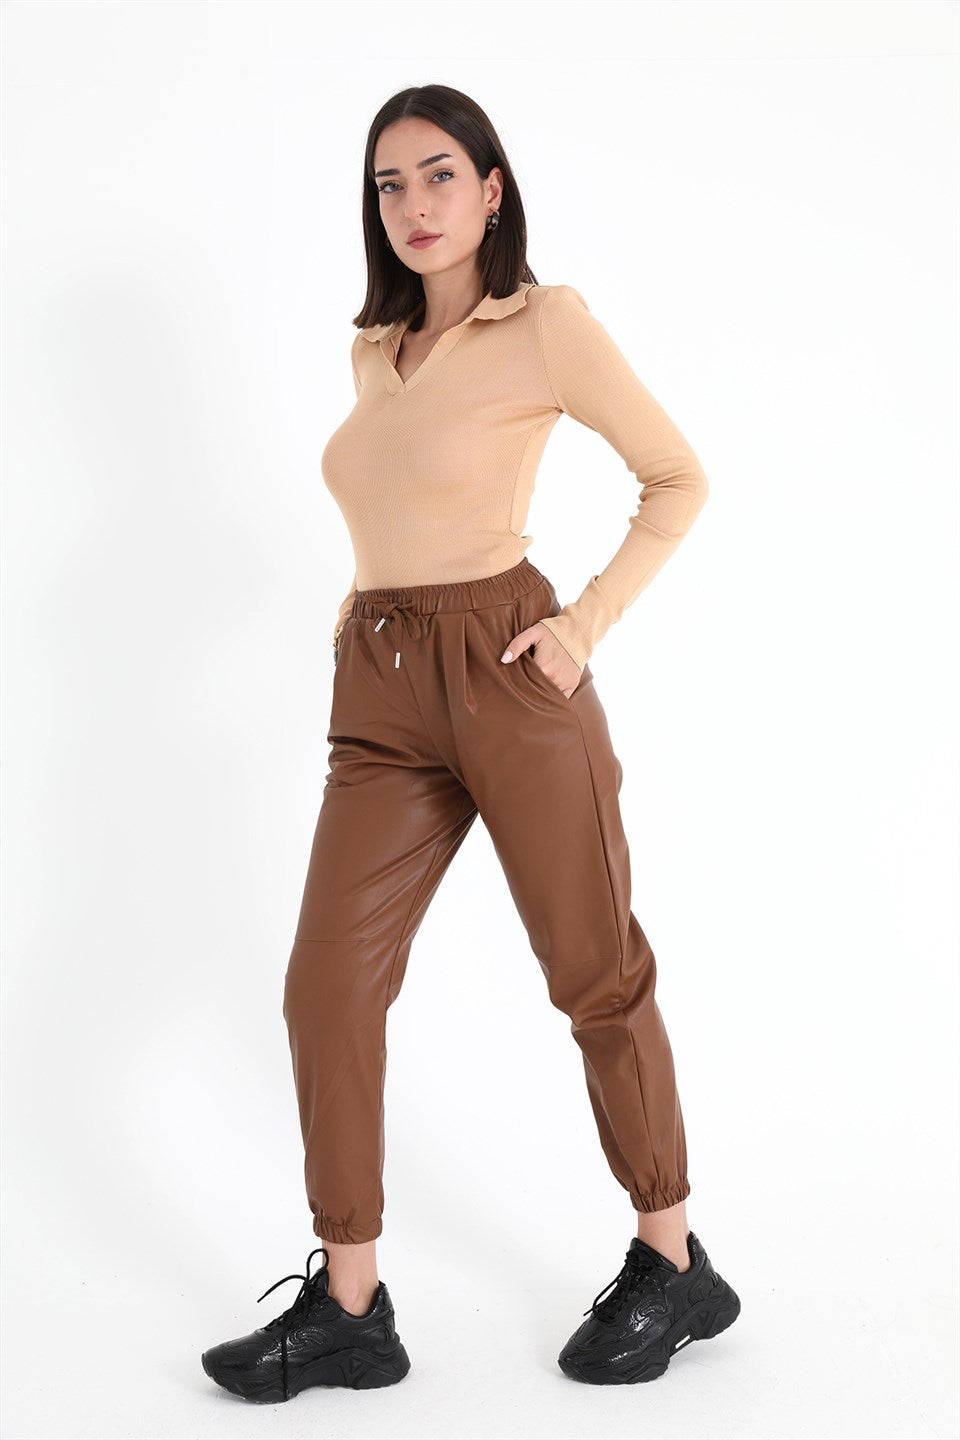 Women's Pleated Leather Pants with Elastic Waist and Elastic Legs - Tan - STREETMODE ™